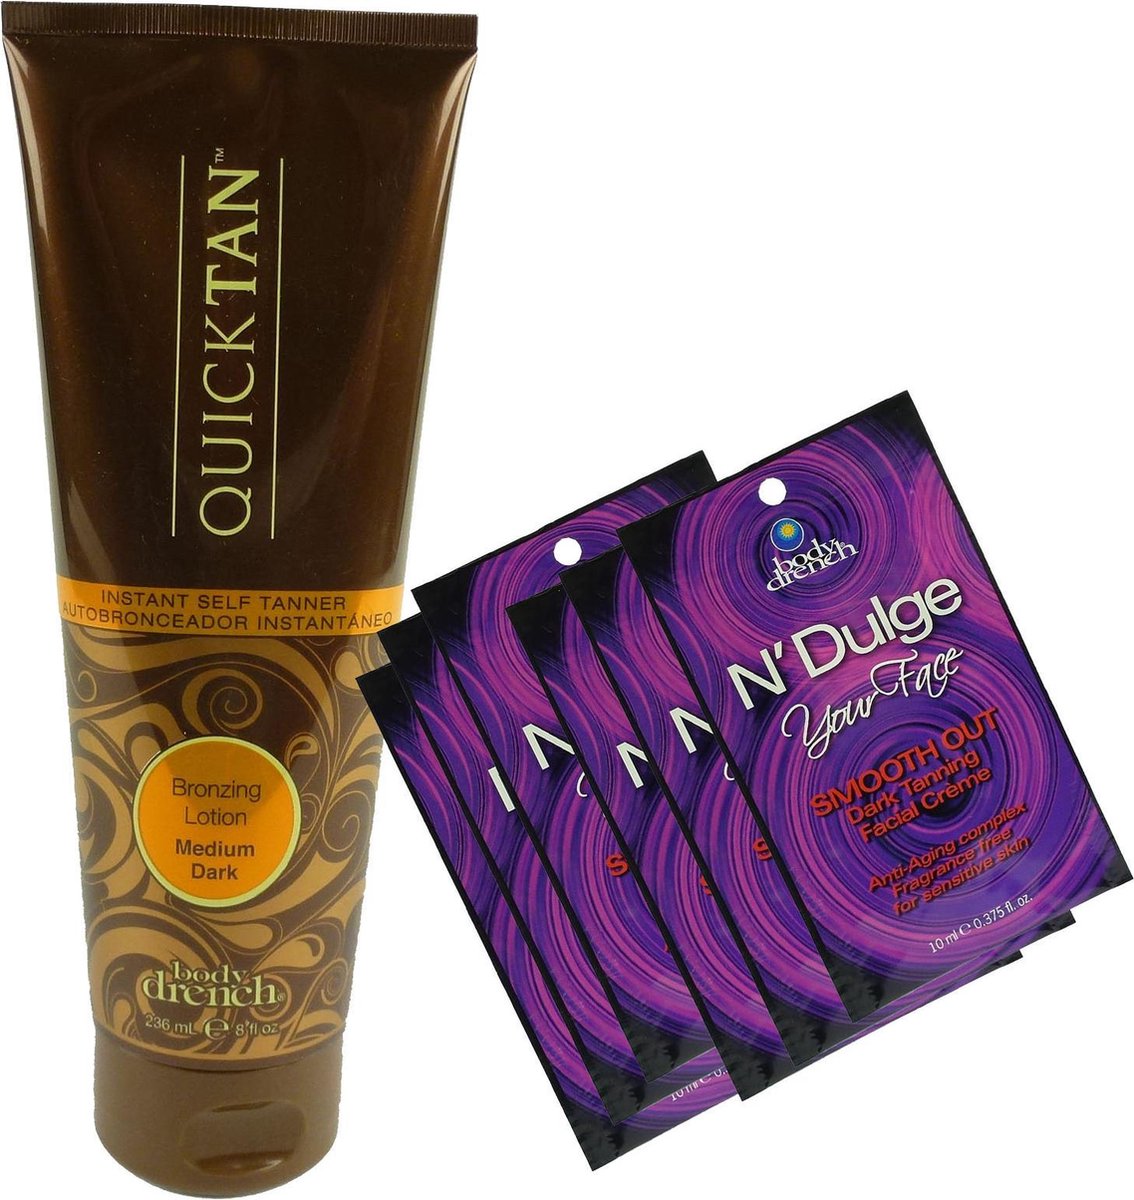 1x Body Drench Quick Tan + 6x NDulge your Face Body Face Tanning Cream Set